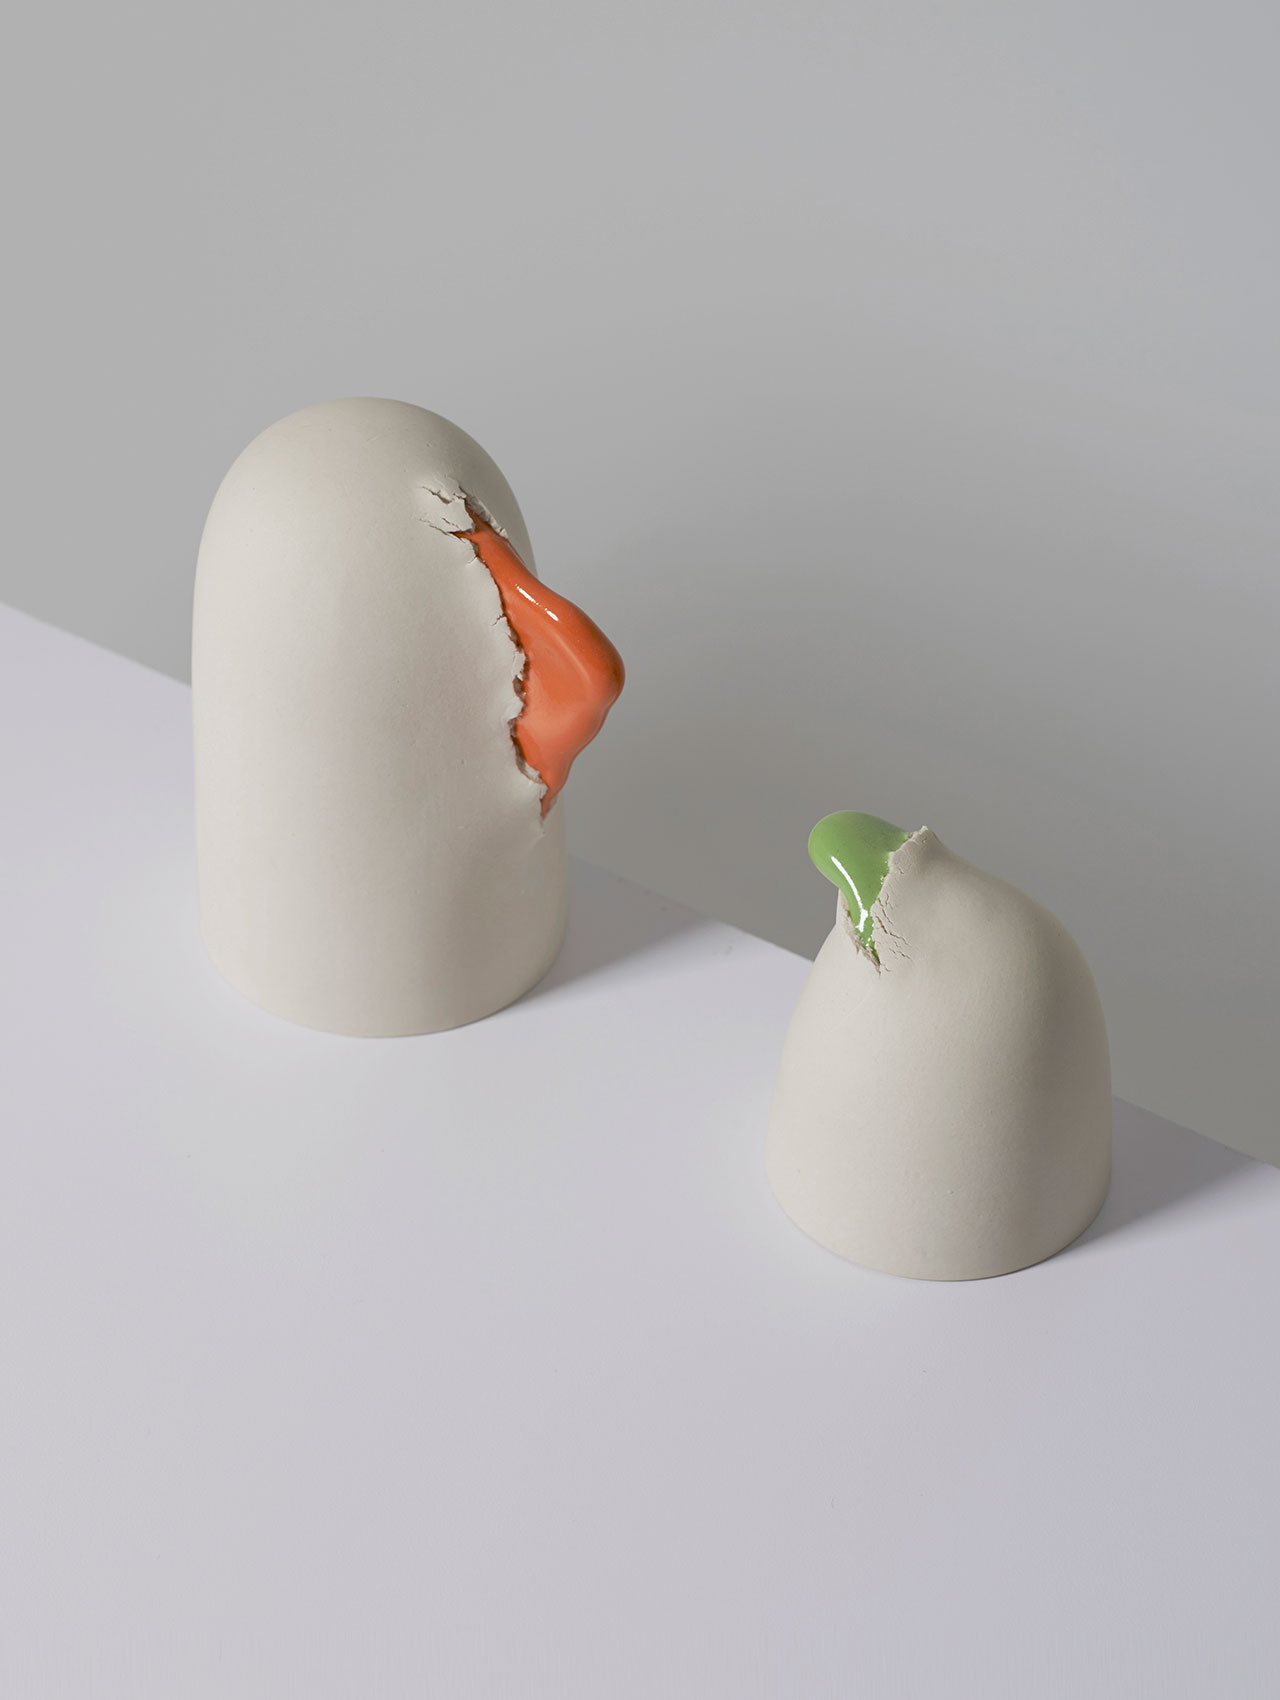 Emily Gardiner, Dialogue, Porcelain with solid glaze protrusions. Max height 14cm. Photo by Sylvan Deleu.